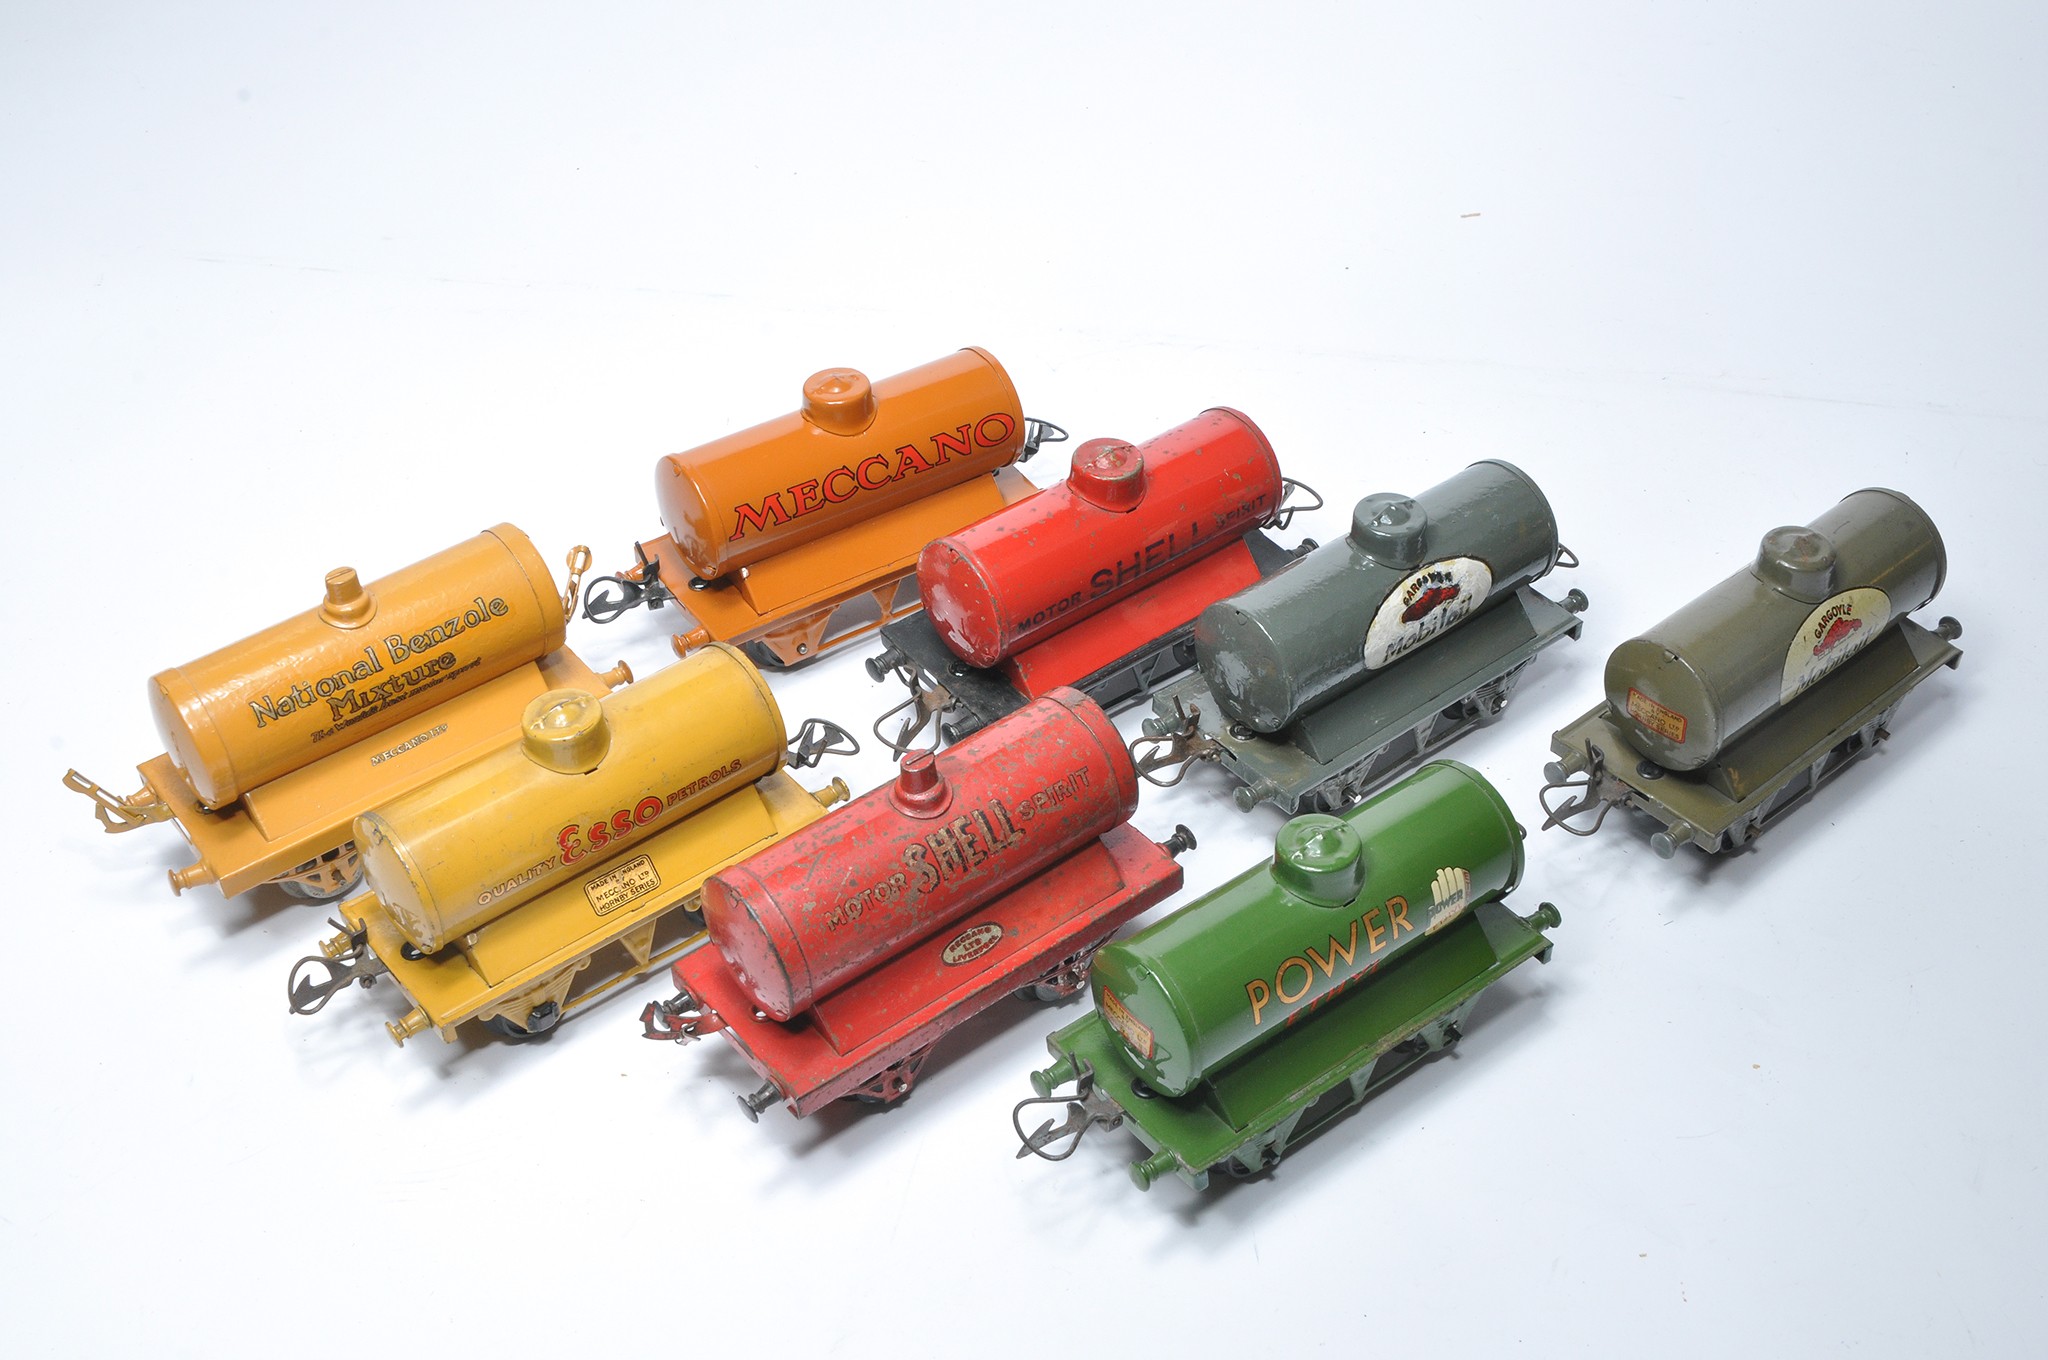 Hornby O Gauge Model Railway group of Eight Tank Wagons with various liveries as shown.